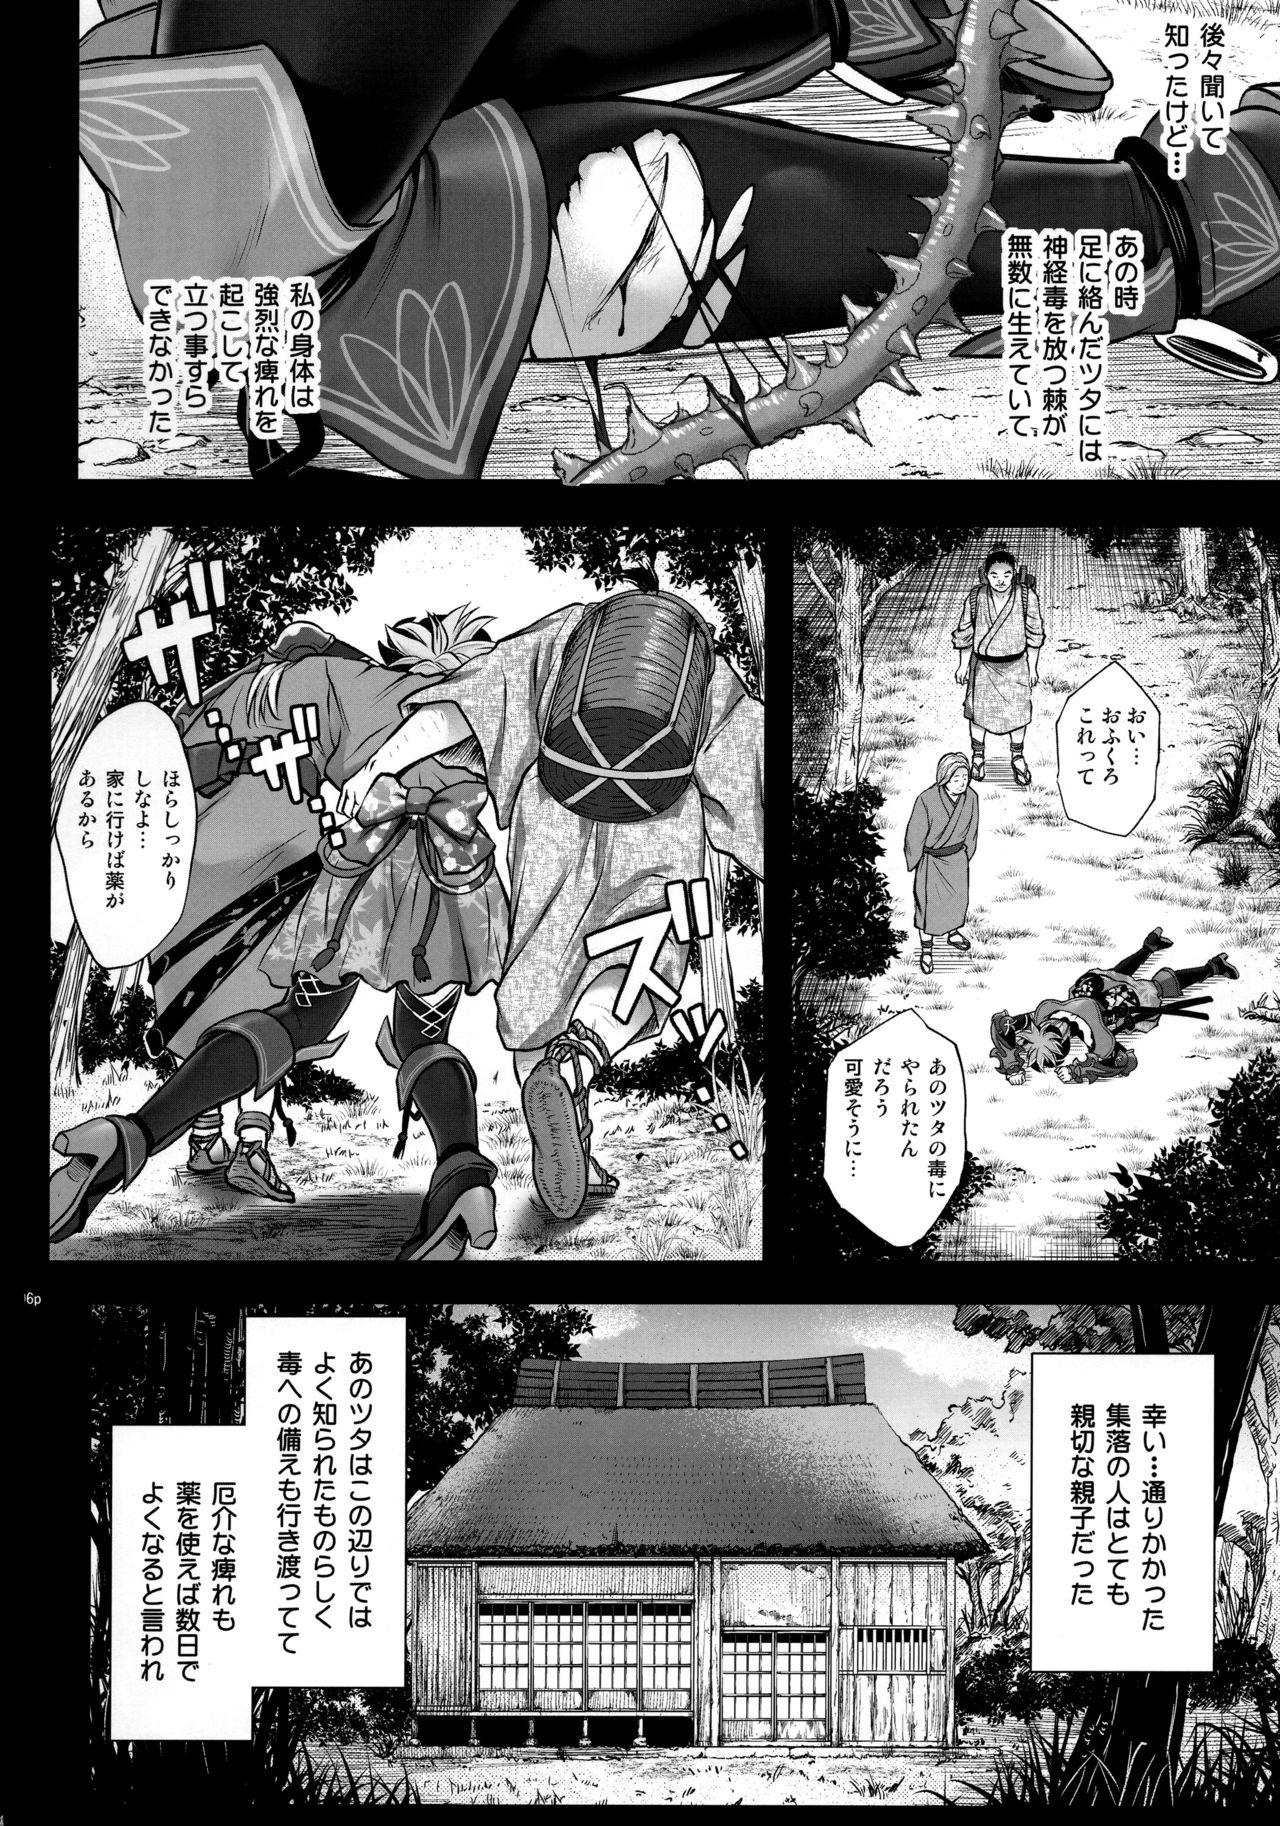 Tiny T-32 hooollow - Fate grand order Japanese - Page 6